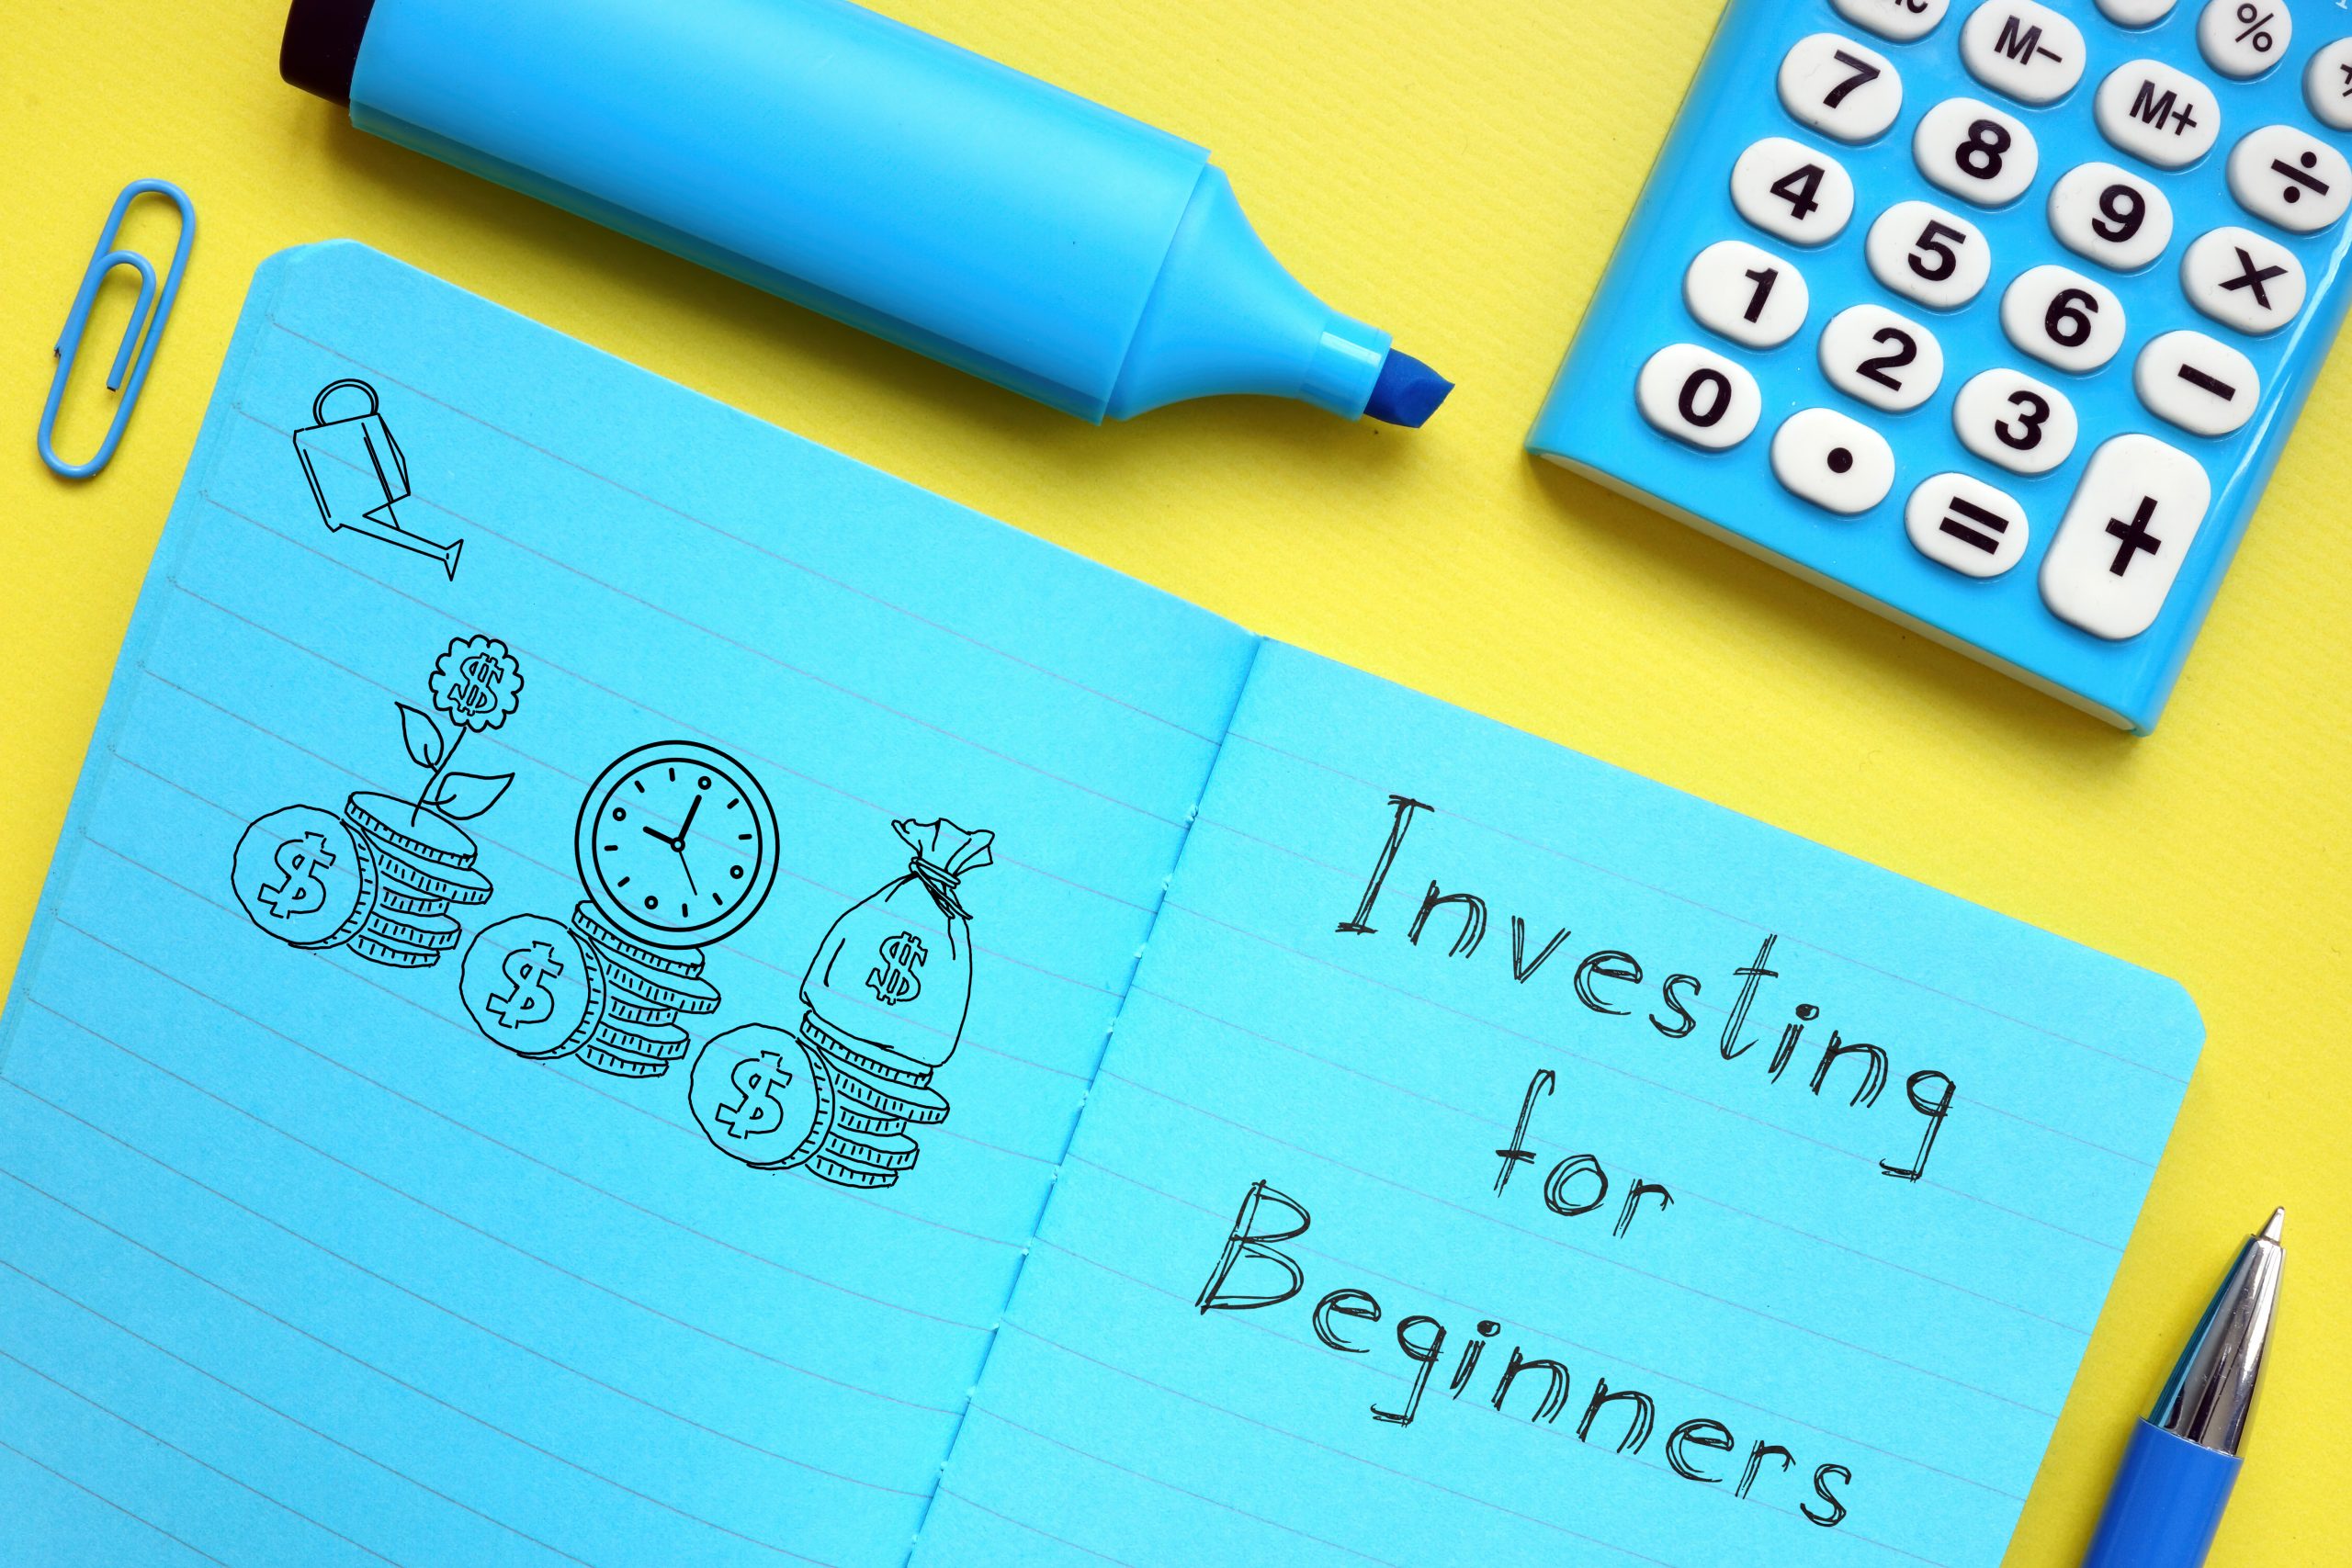 Investing for beginners is shown using a text